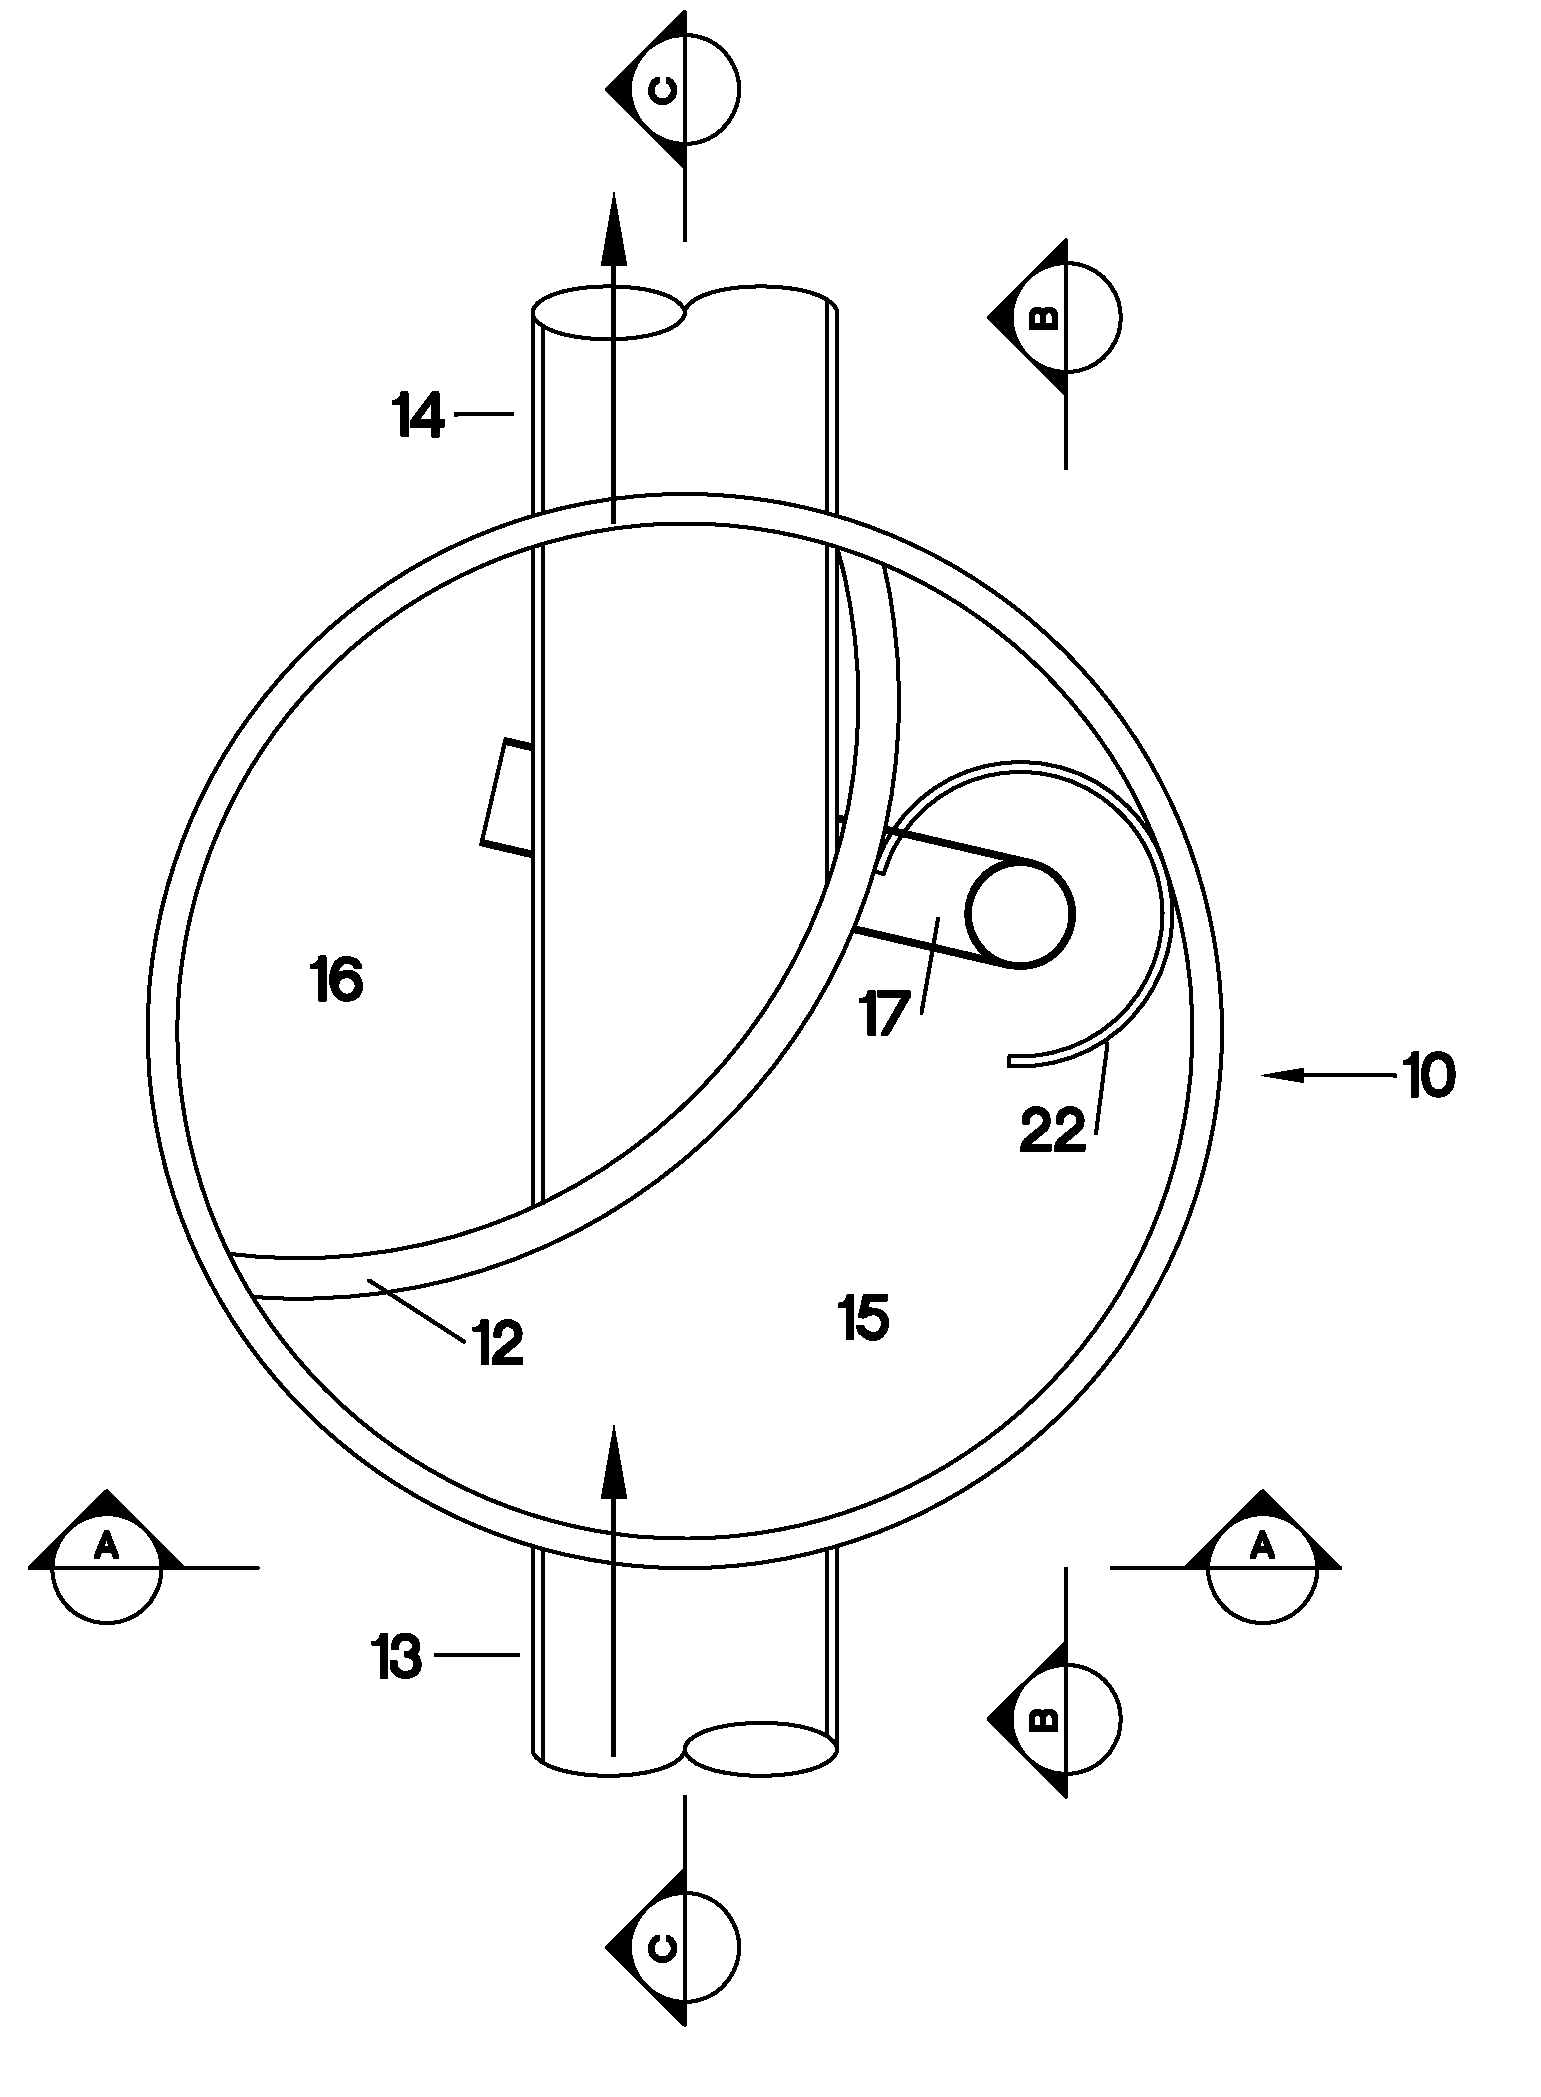 Apparatus to Separate Light Fluids, Heavy Fluids, and/or Sediment from a Fluid Stream